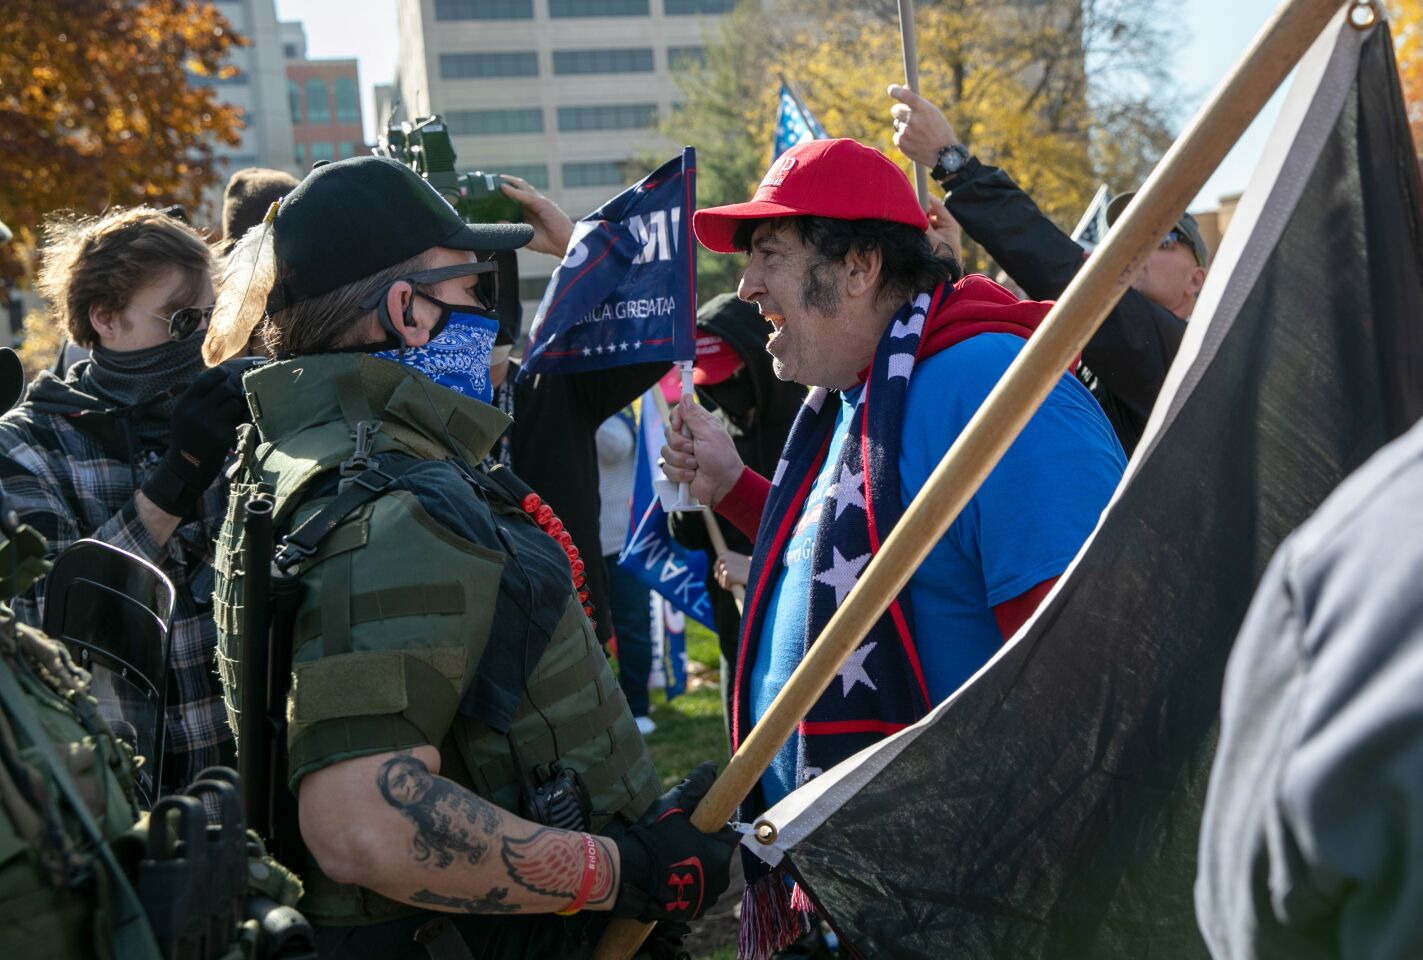 An unmasked Trump supporter shouts down counterprotesters during a demonstration in Lansing, Mich.